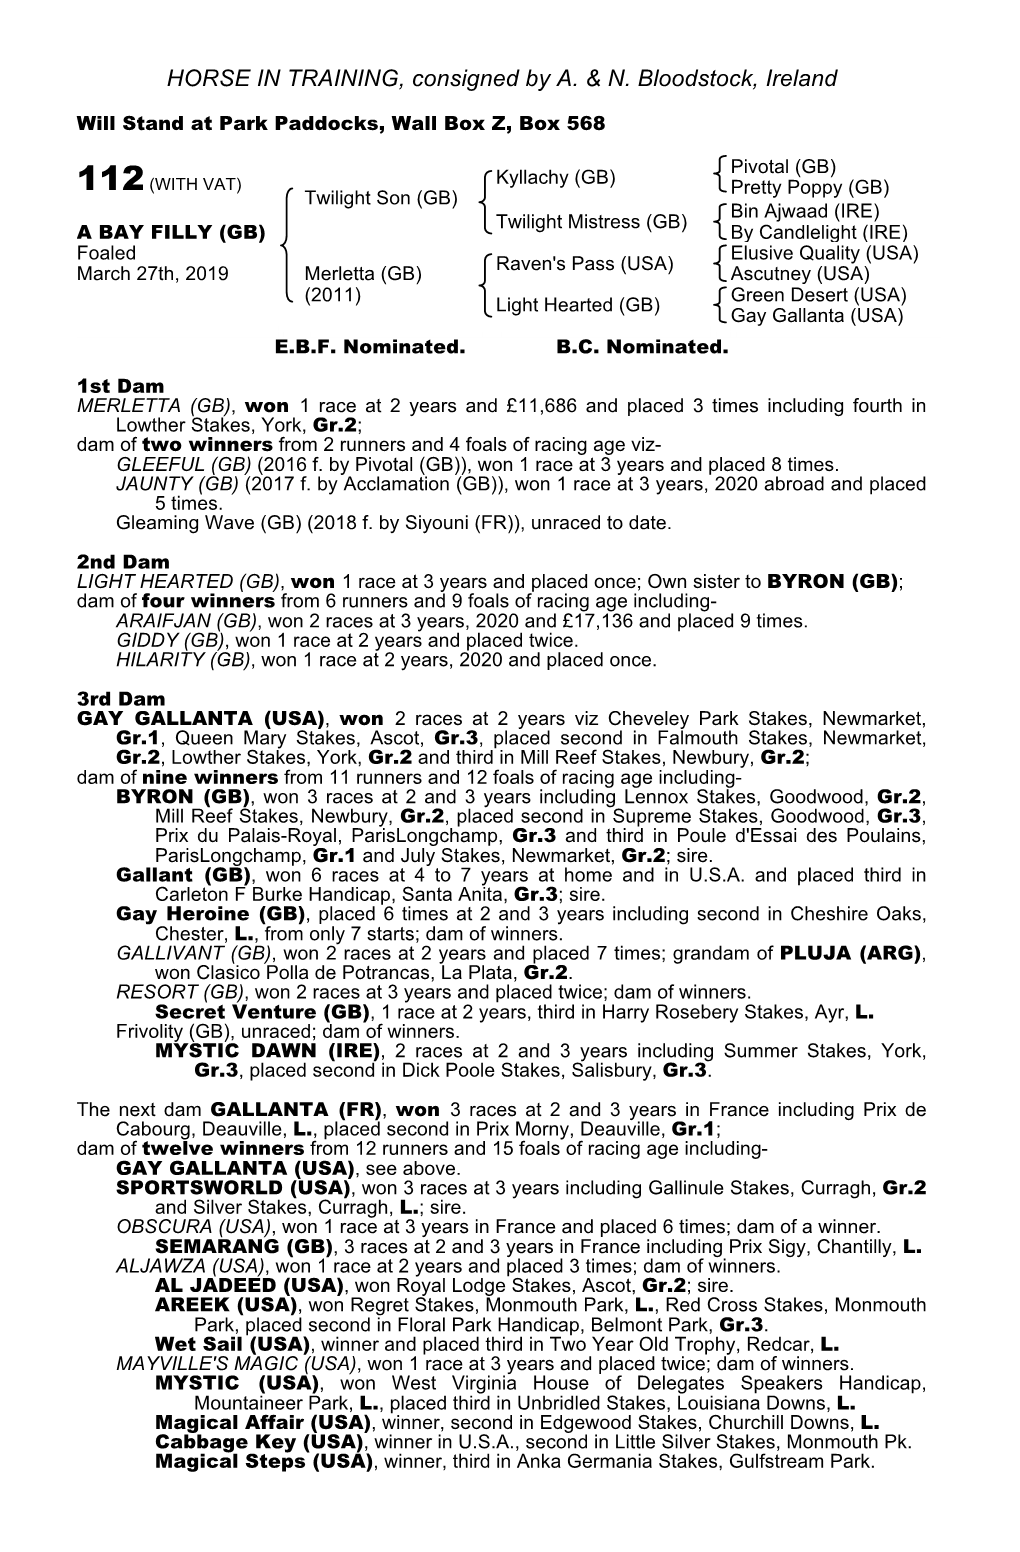 HORSE in TRAINING, Consigned by A. & N. Bloodstock, Ireland